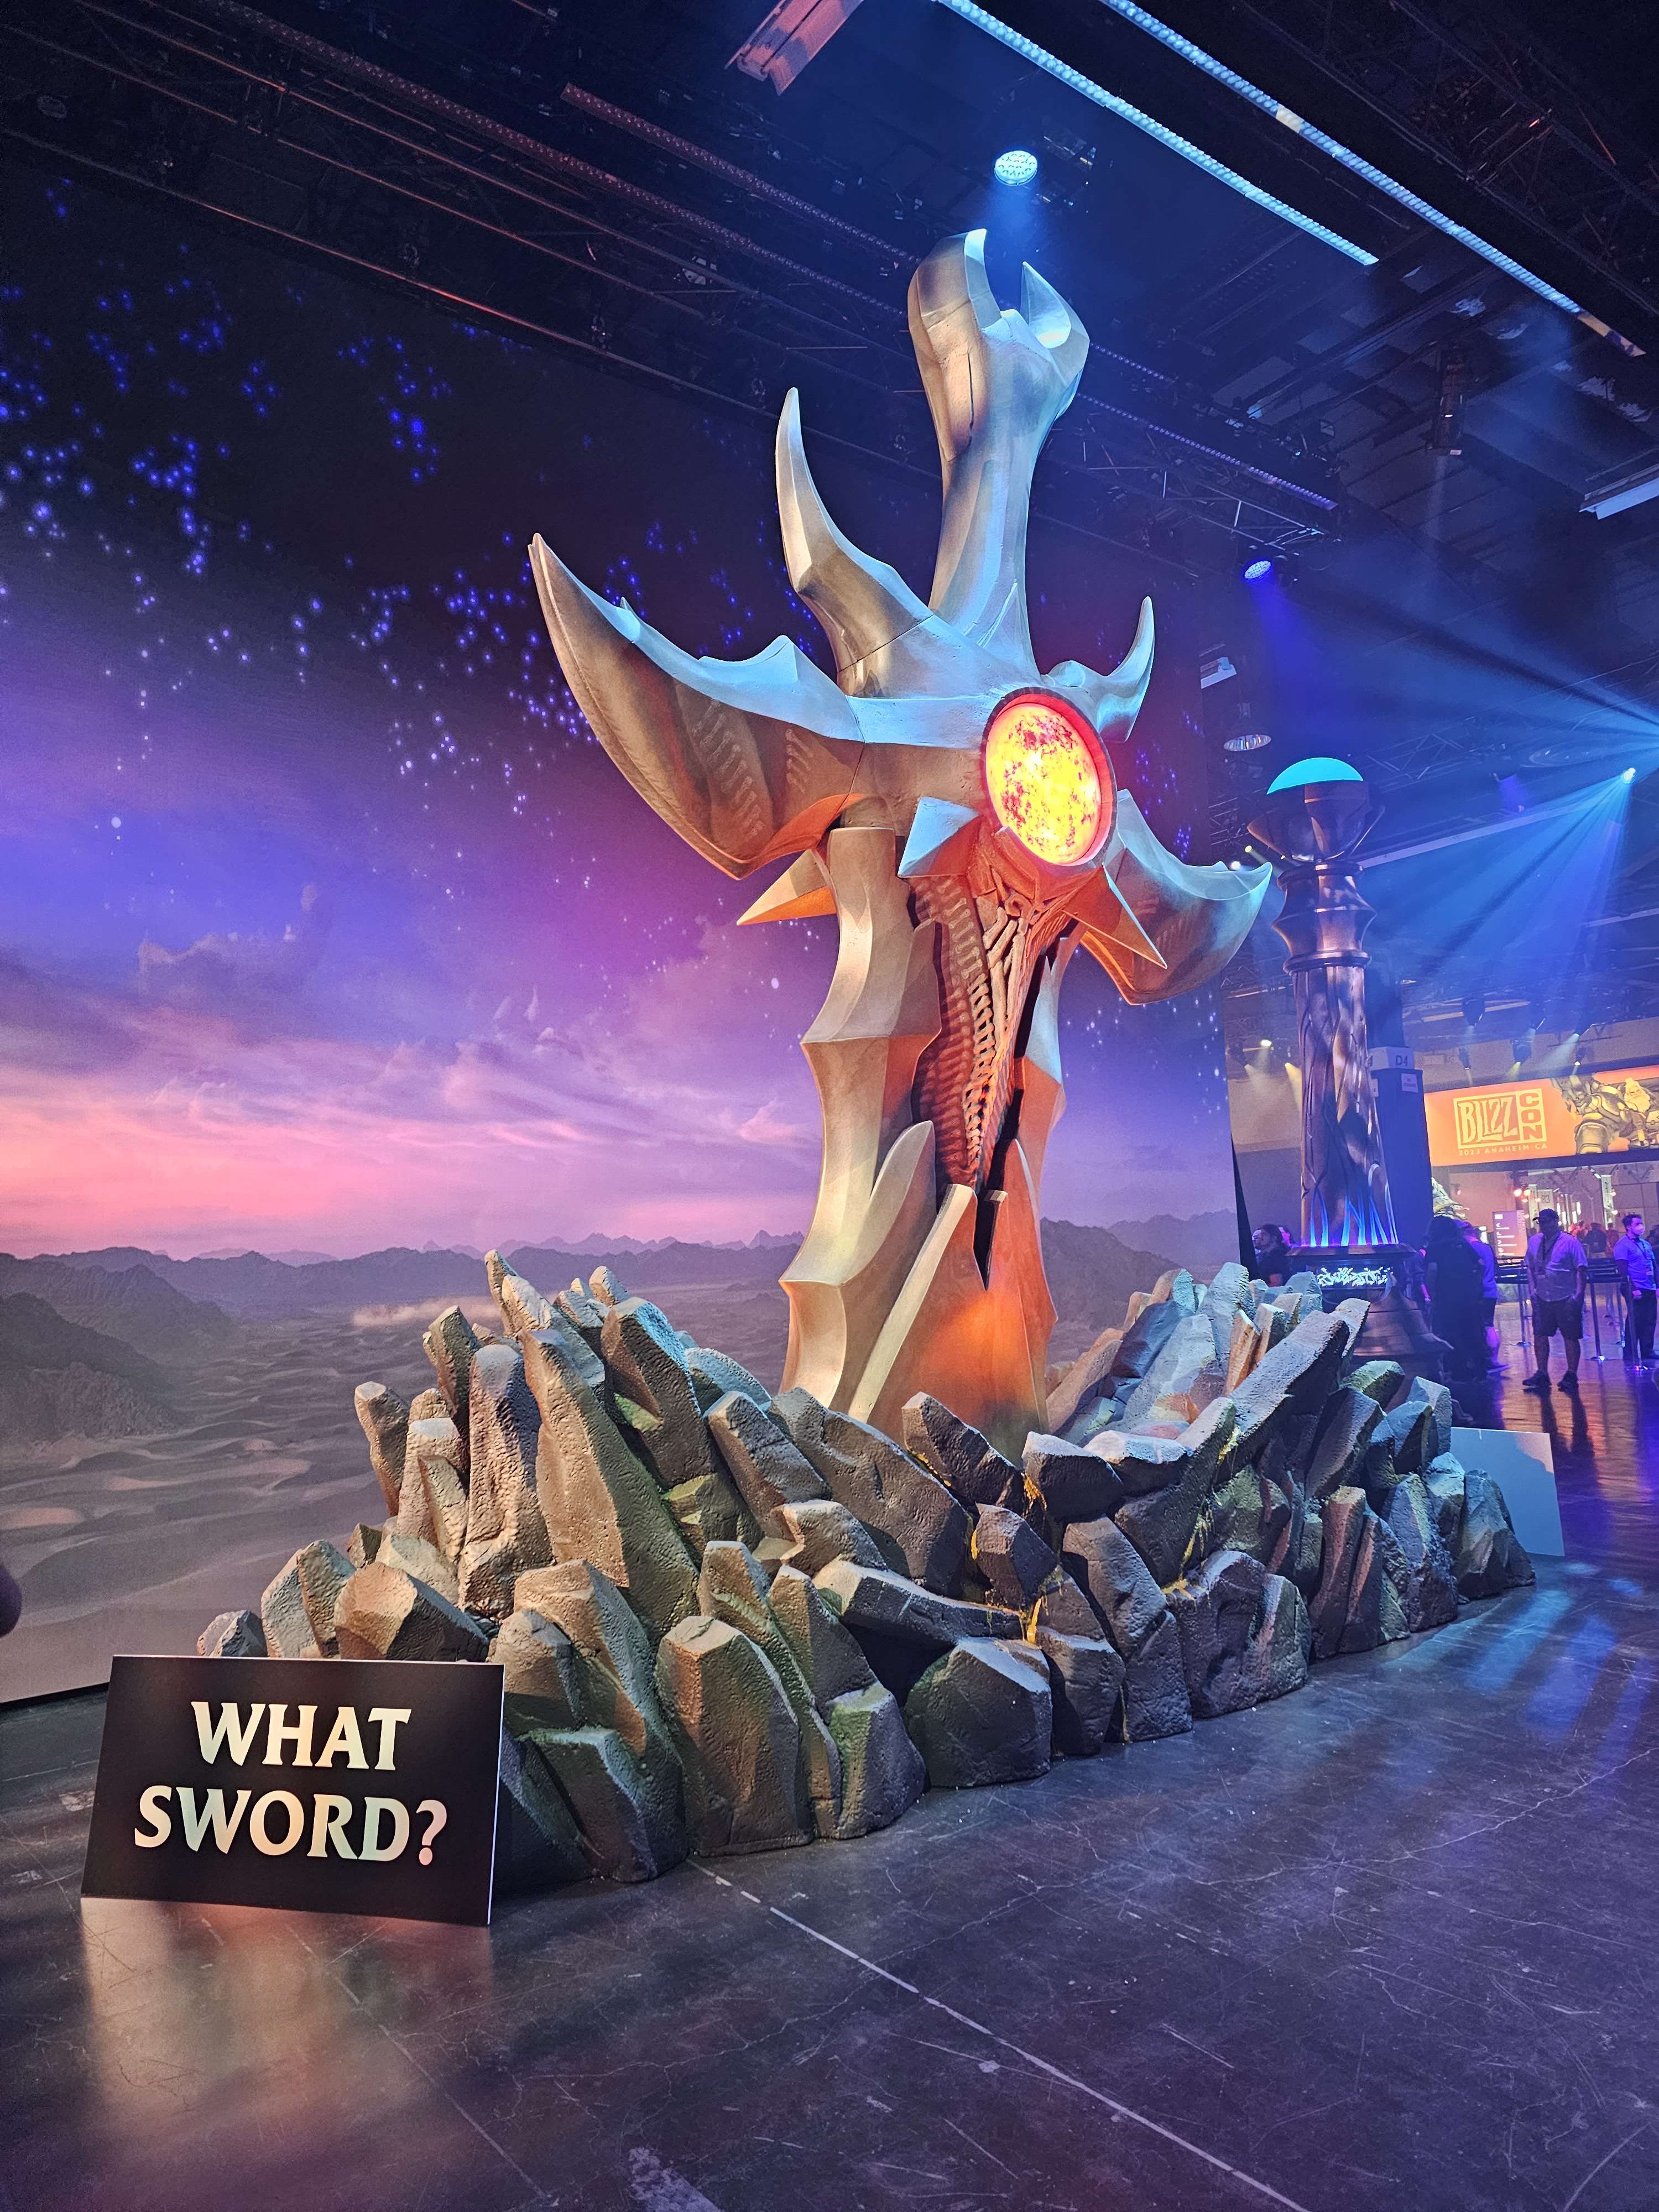 Sword of Sargeras BlizzCon Experience - What Sword? - Wowhead News